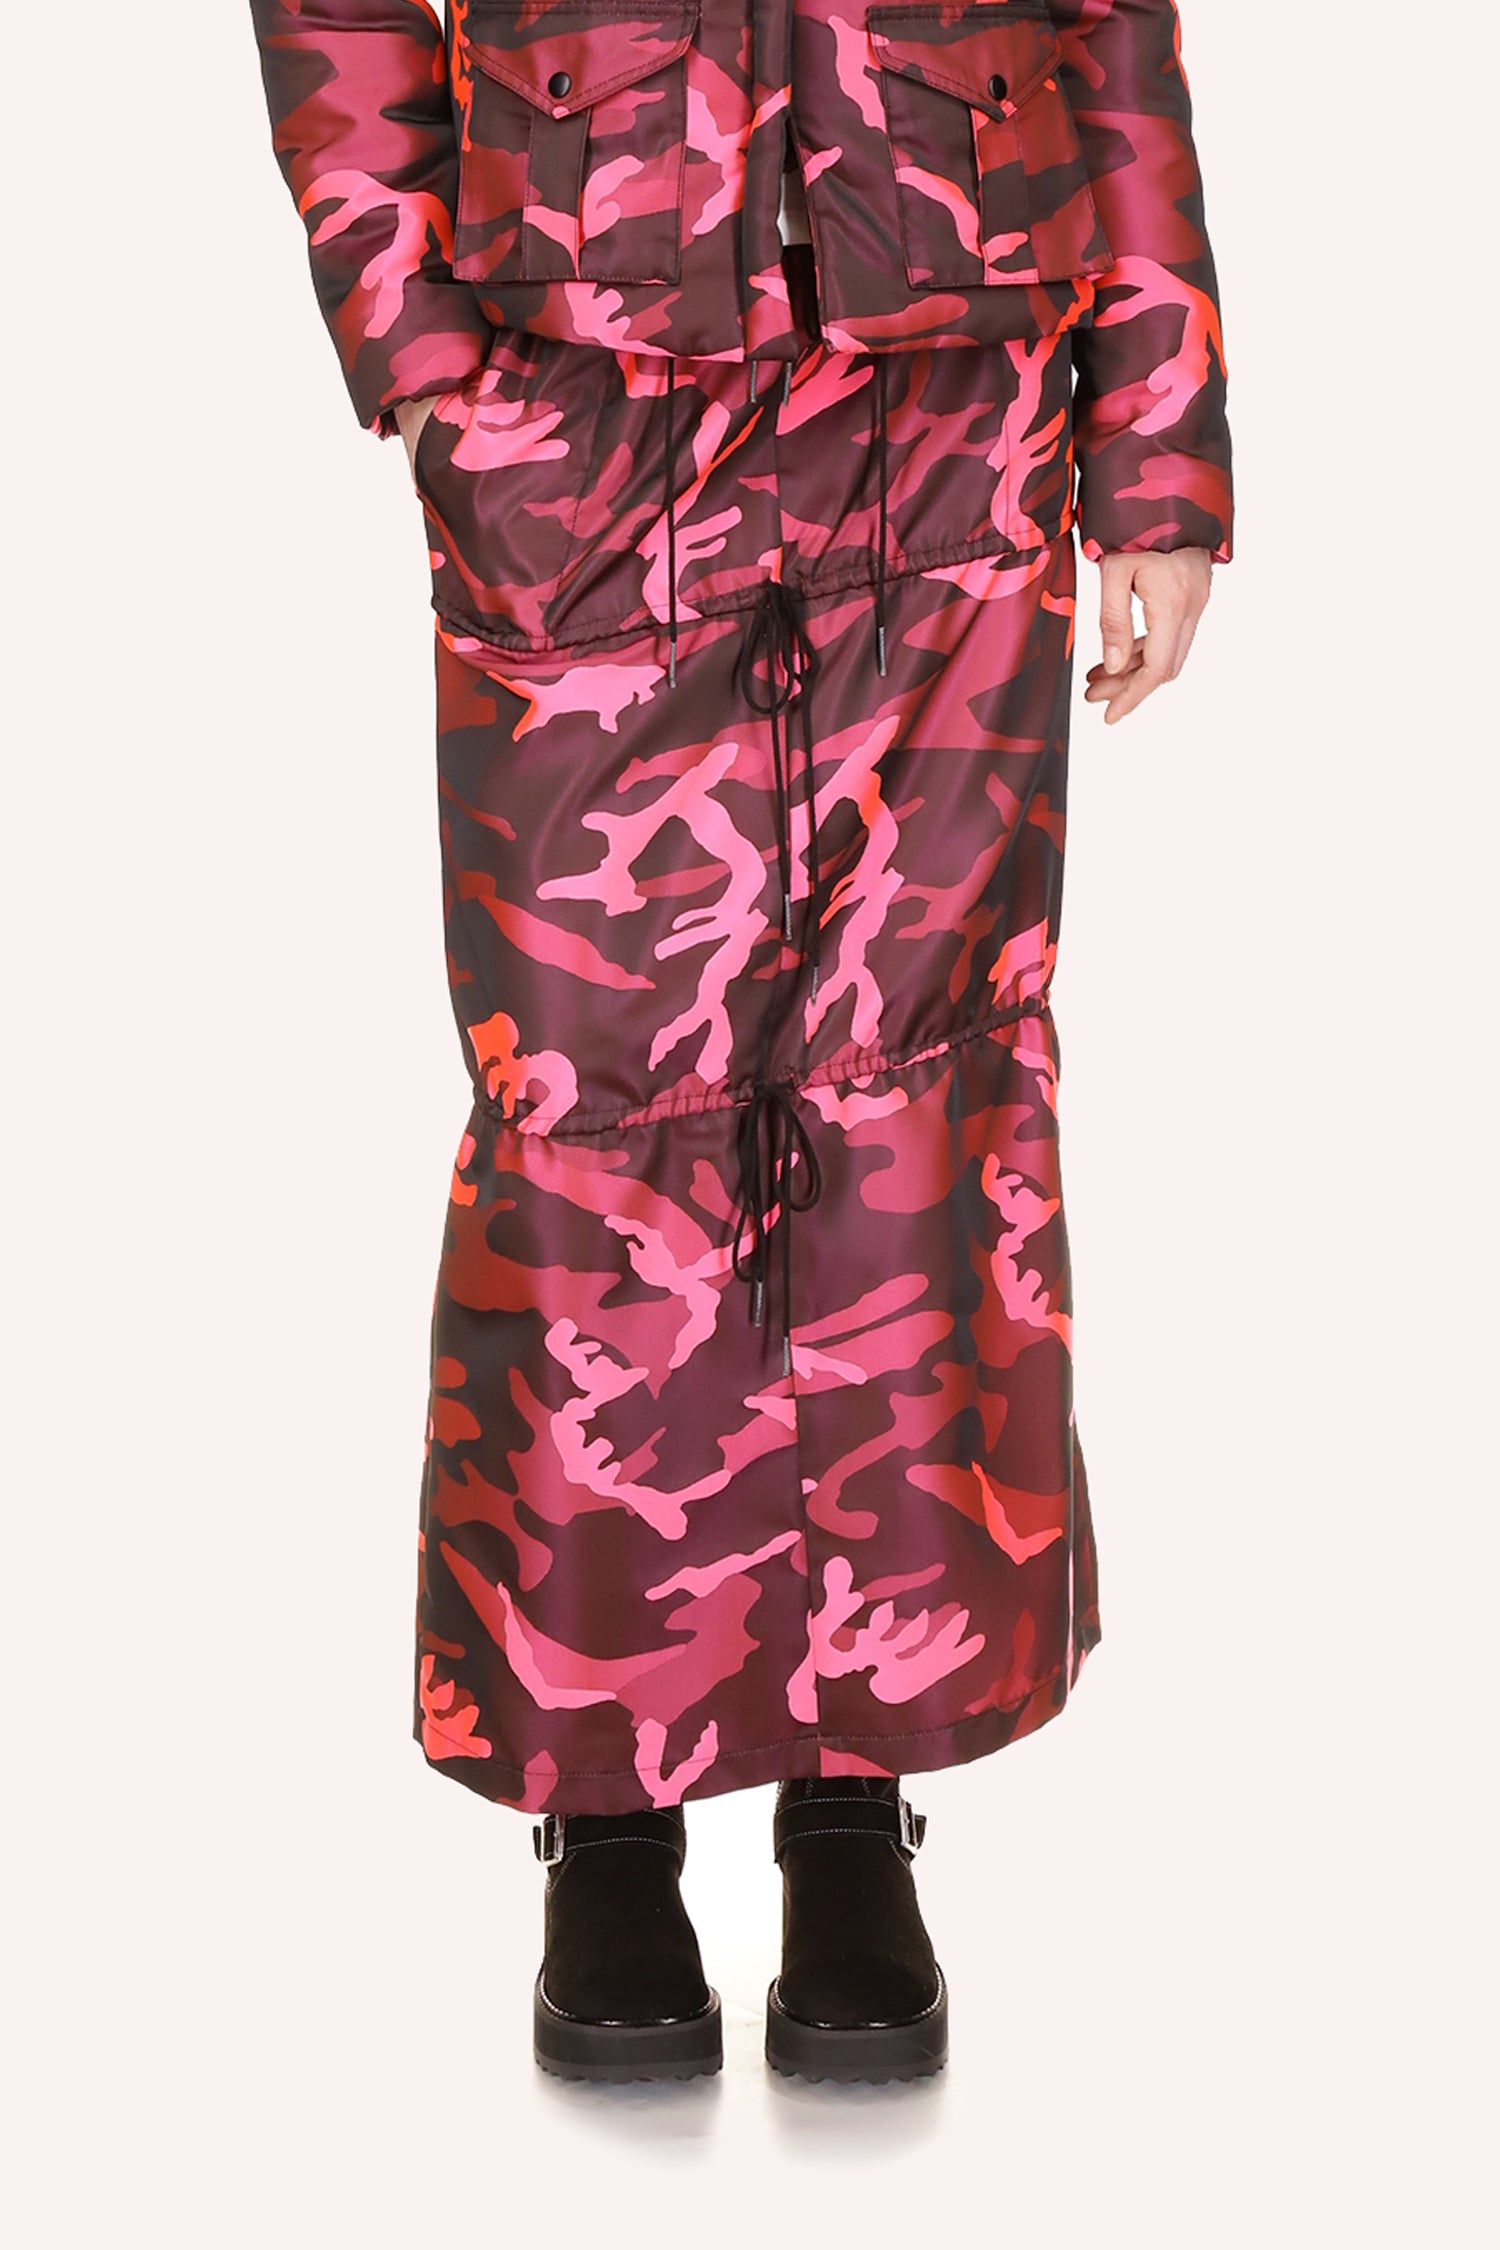 Neon Camouflage Jacket Hot Pink from Anna Sui pair with Neon Camouflage pants